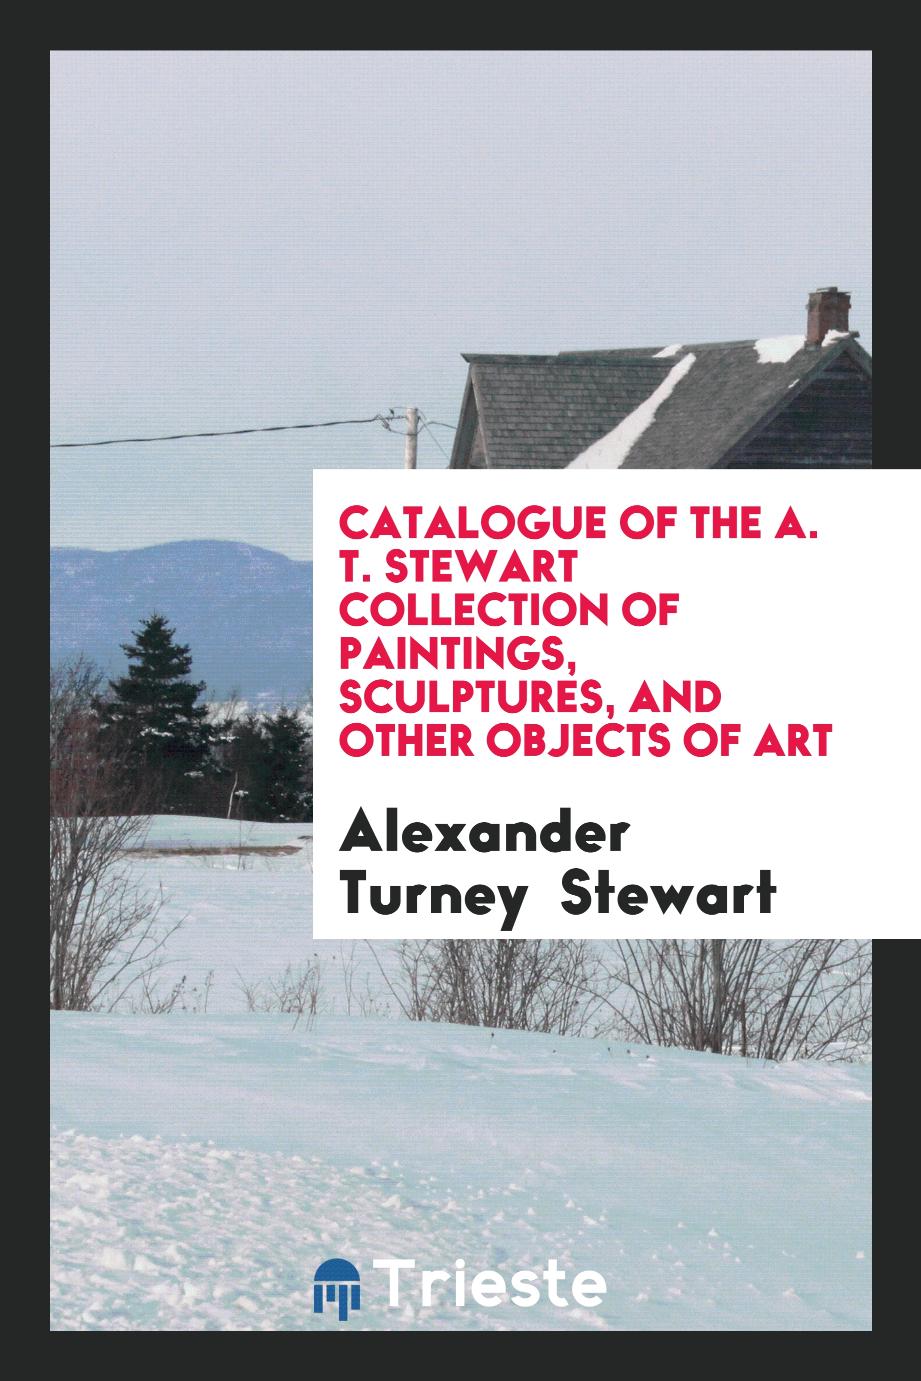 Catalogue of the A. T. Stewart Collection of Paintings, Sculptures, and Other Objects of Art